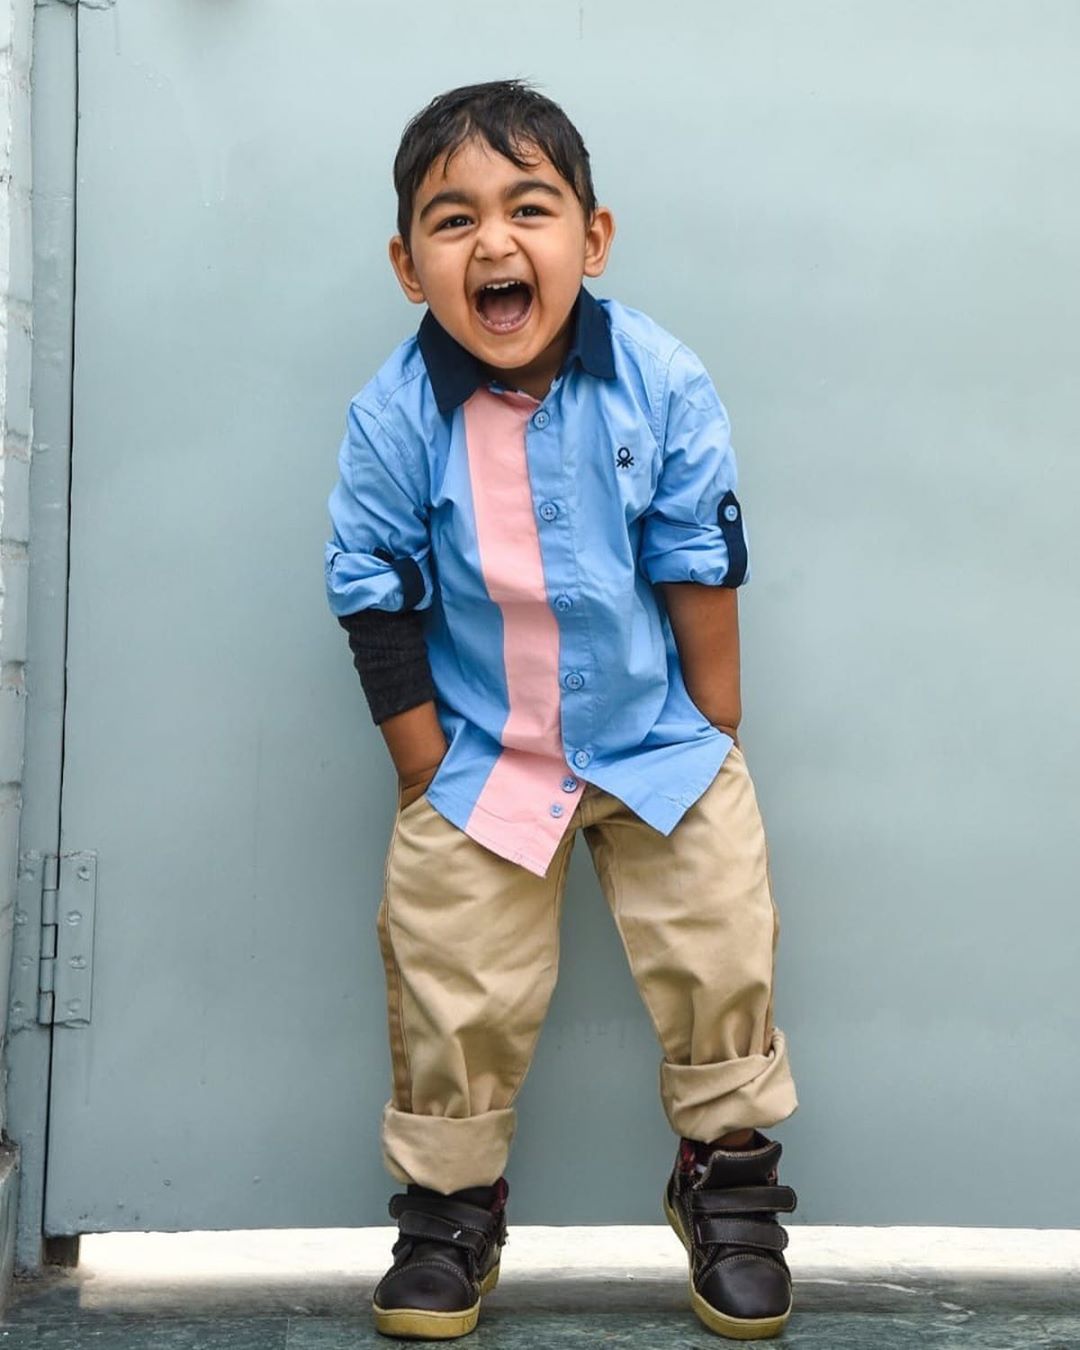 MYNTRA - Filling your feeds with oodles of cuteness. Double tap to show some love. 📸 @crazylilmum
 Look up product code: 7189012 (shirt) / 11356514 (trousers)
For more on-point looks (for you and kids...